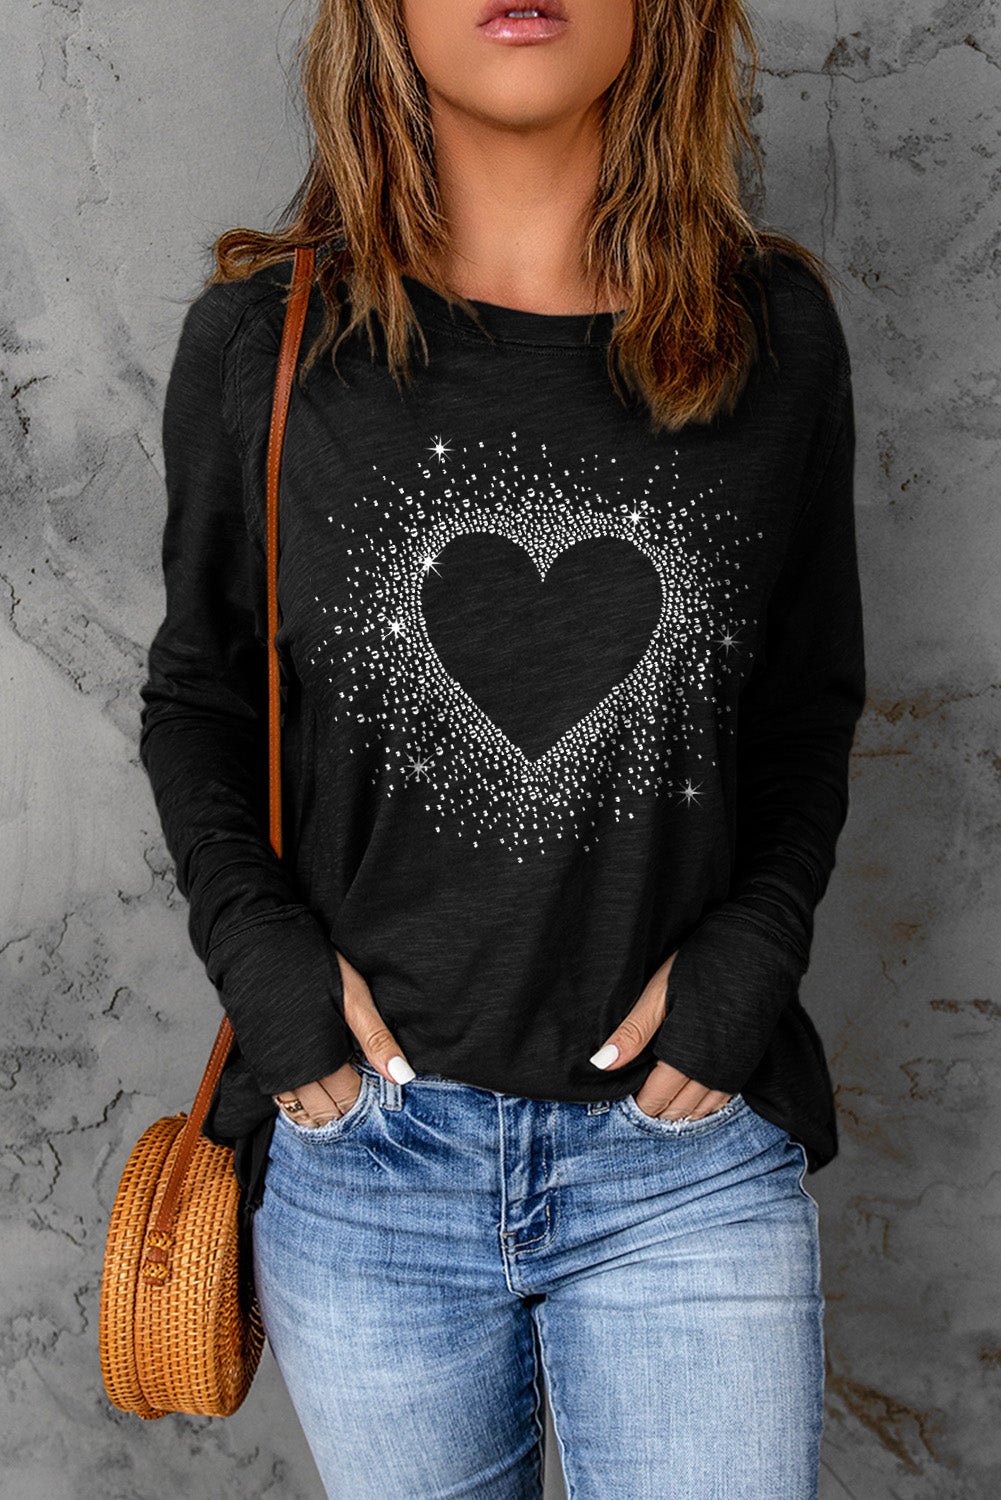 Let Me Adore You Graphic Long Sleeve Top - TJ Outlet